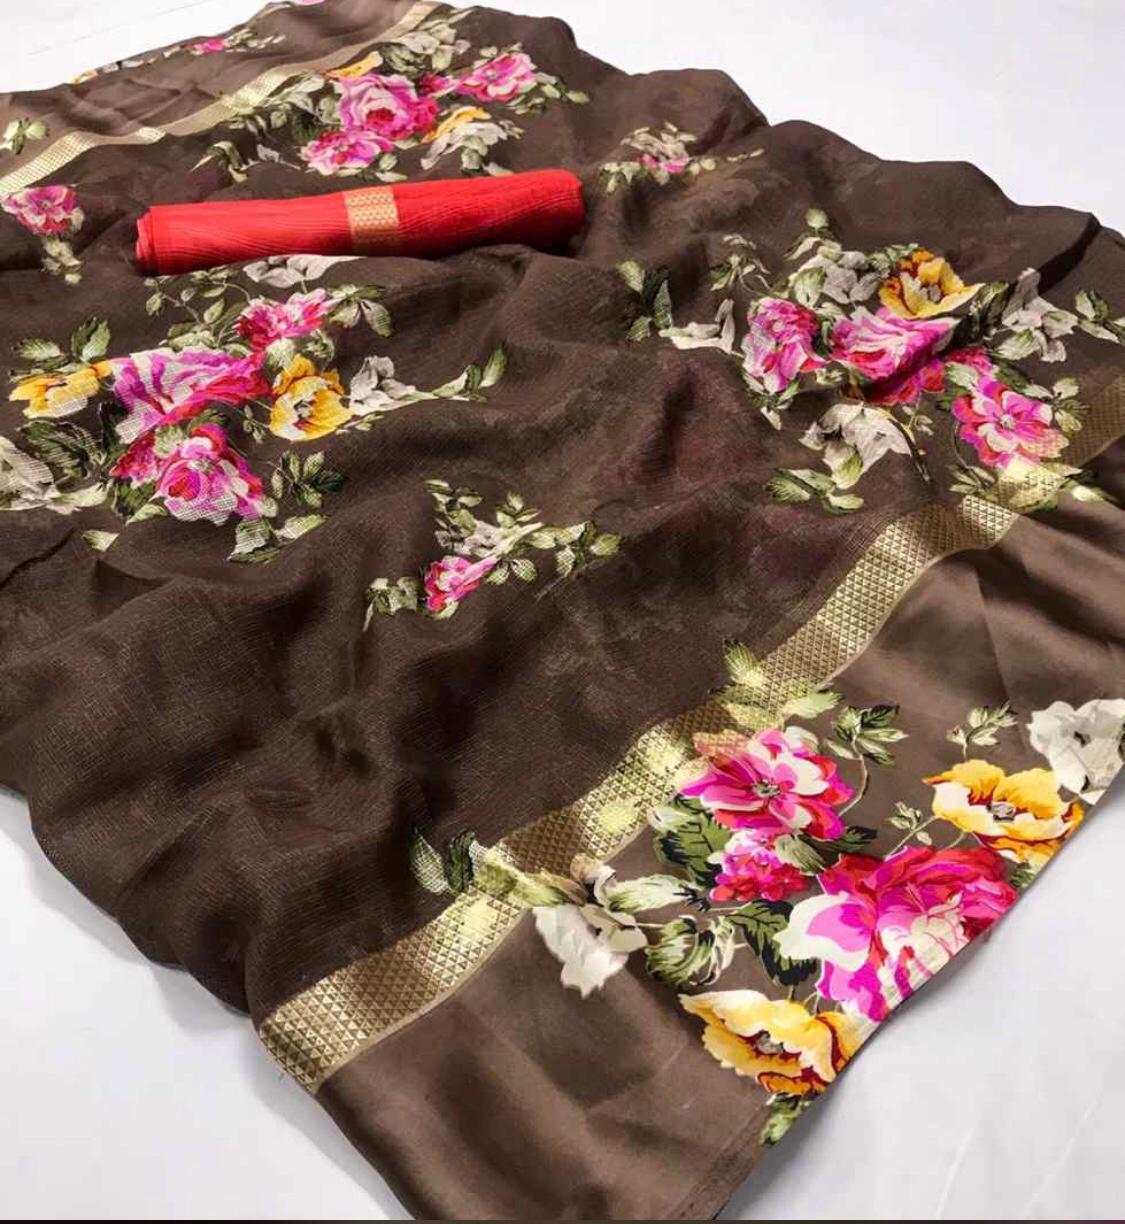 LT fashion zeel beautifully designed sarees in wholesale prices